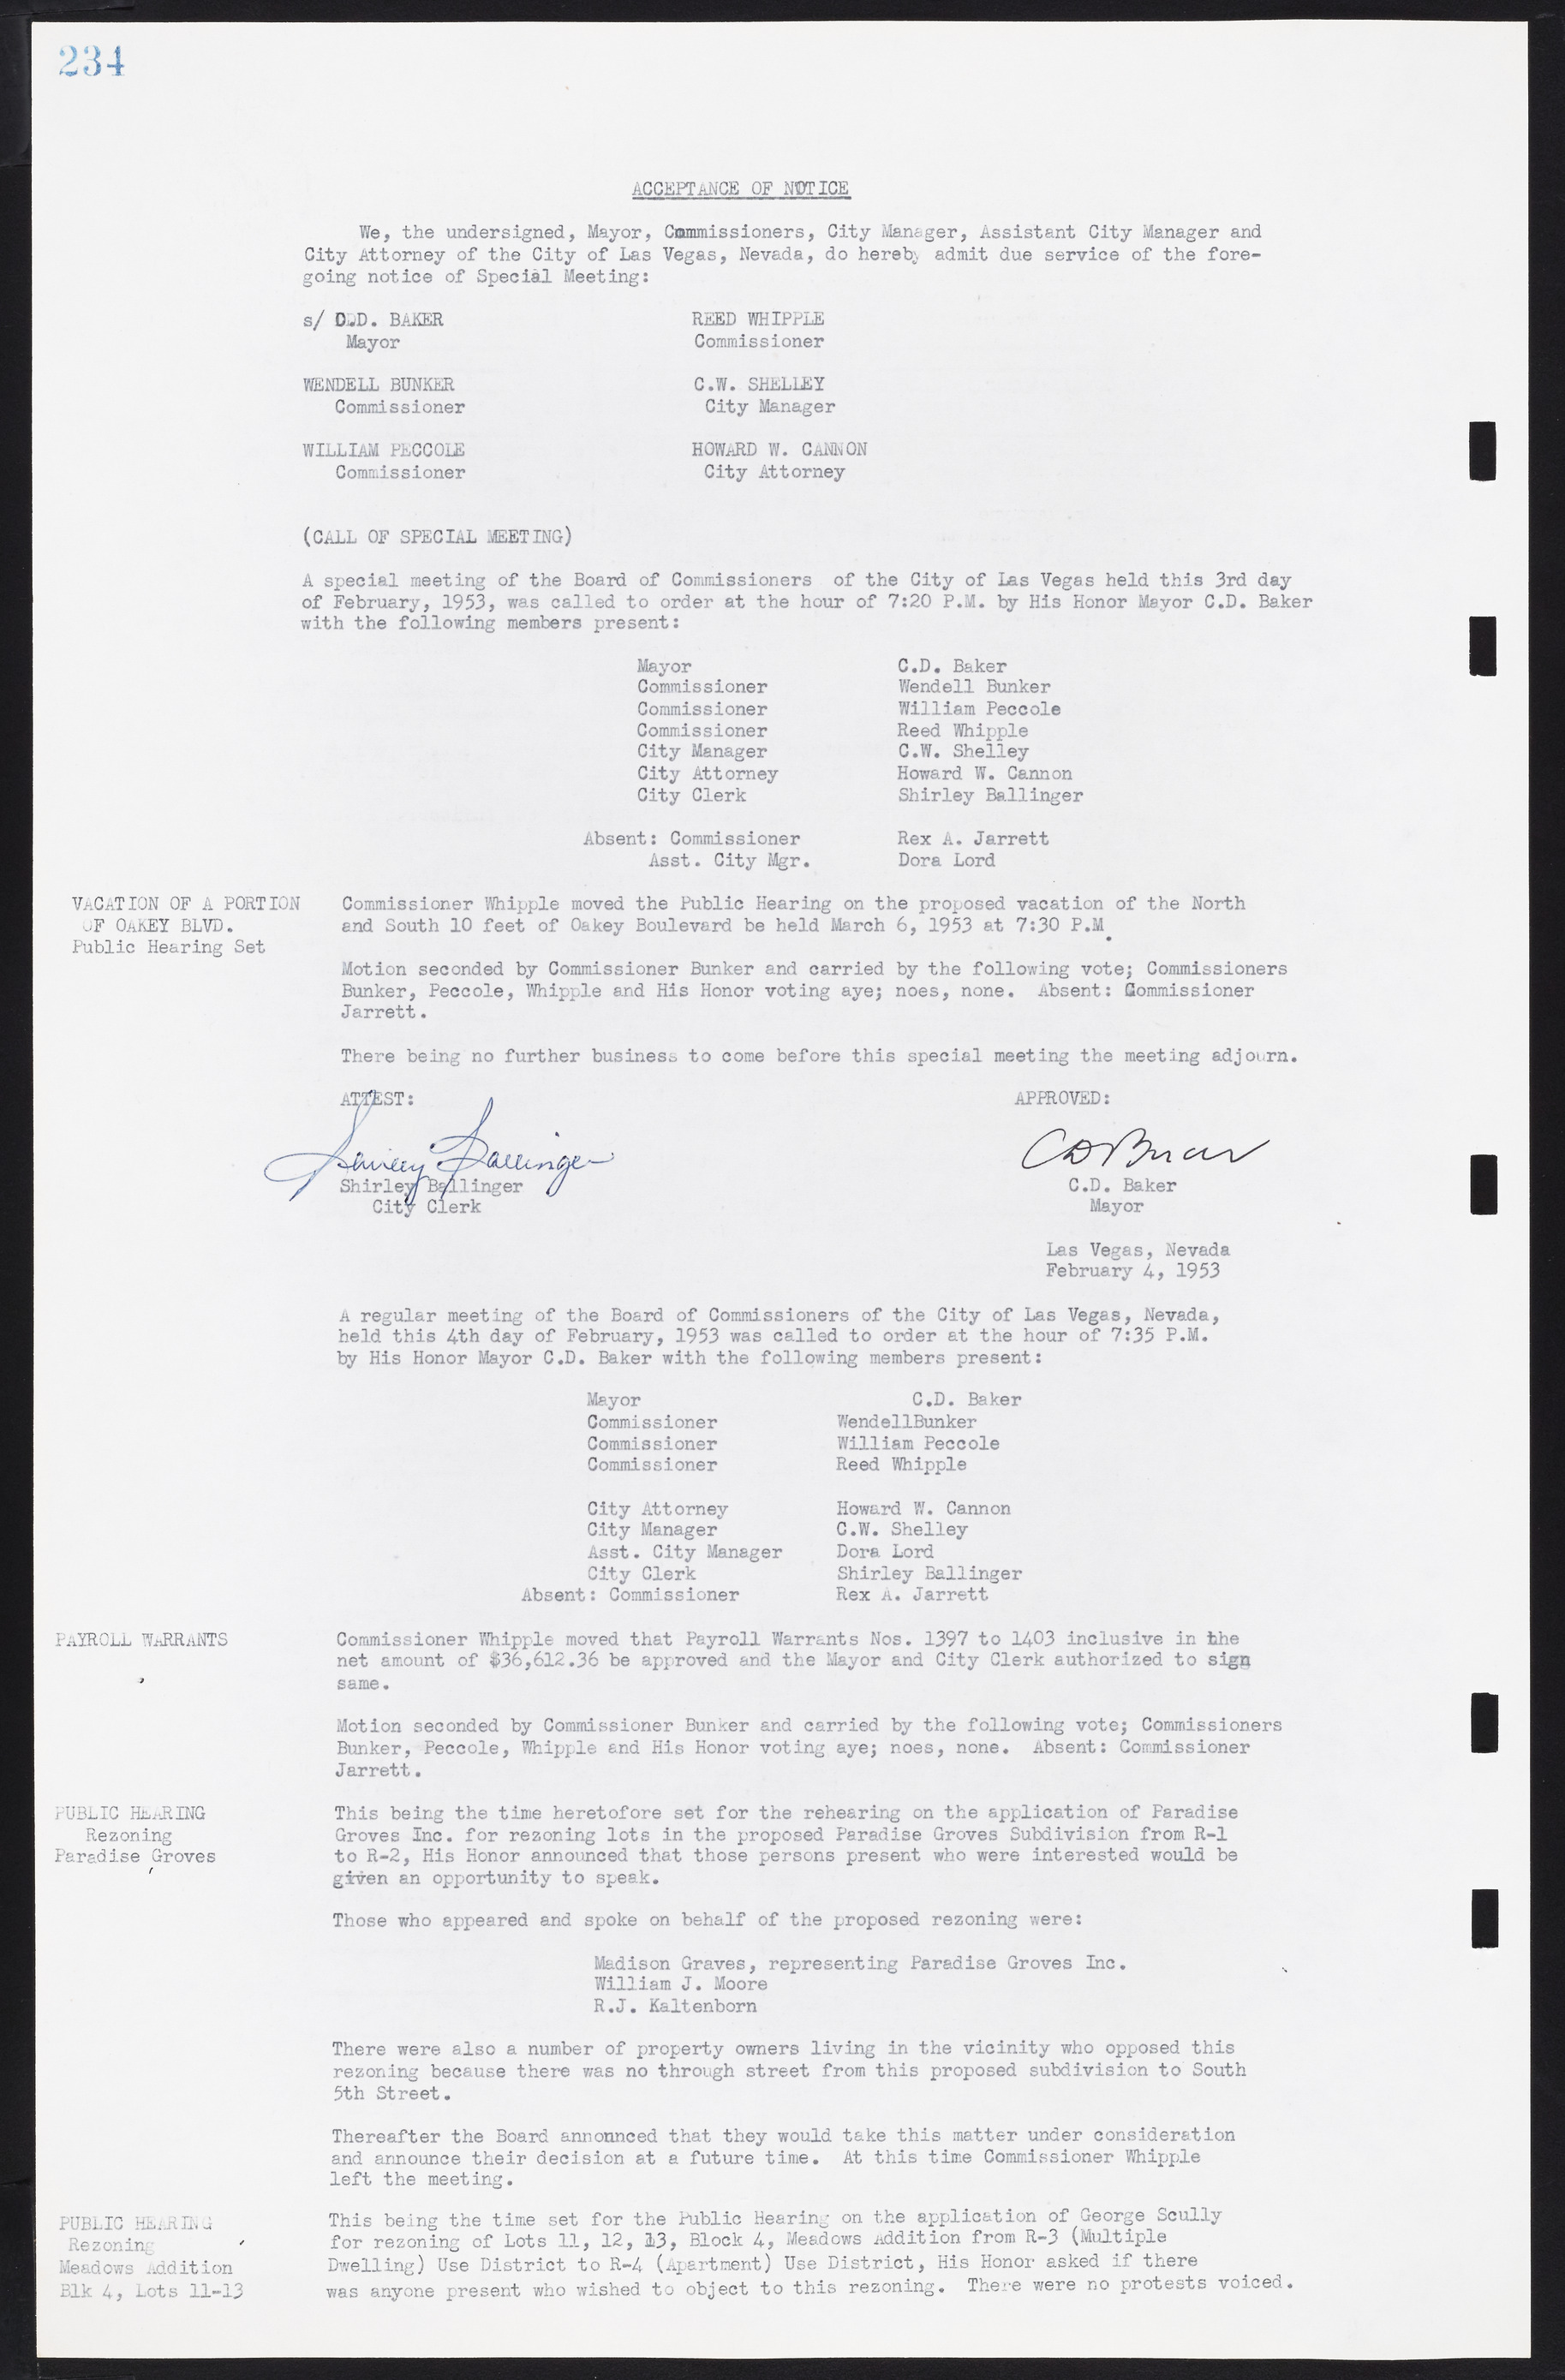 Las Vegas City Commission Minutes, May 26, 1952 to February 17, 1954, lvc000008-250